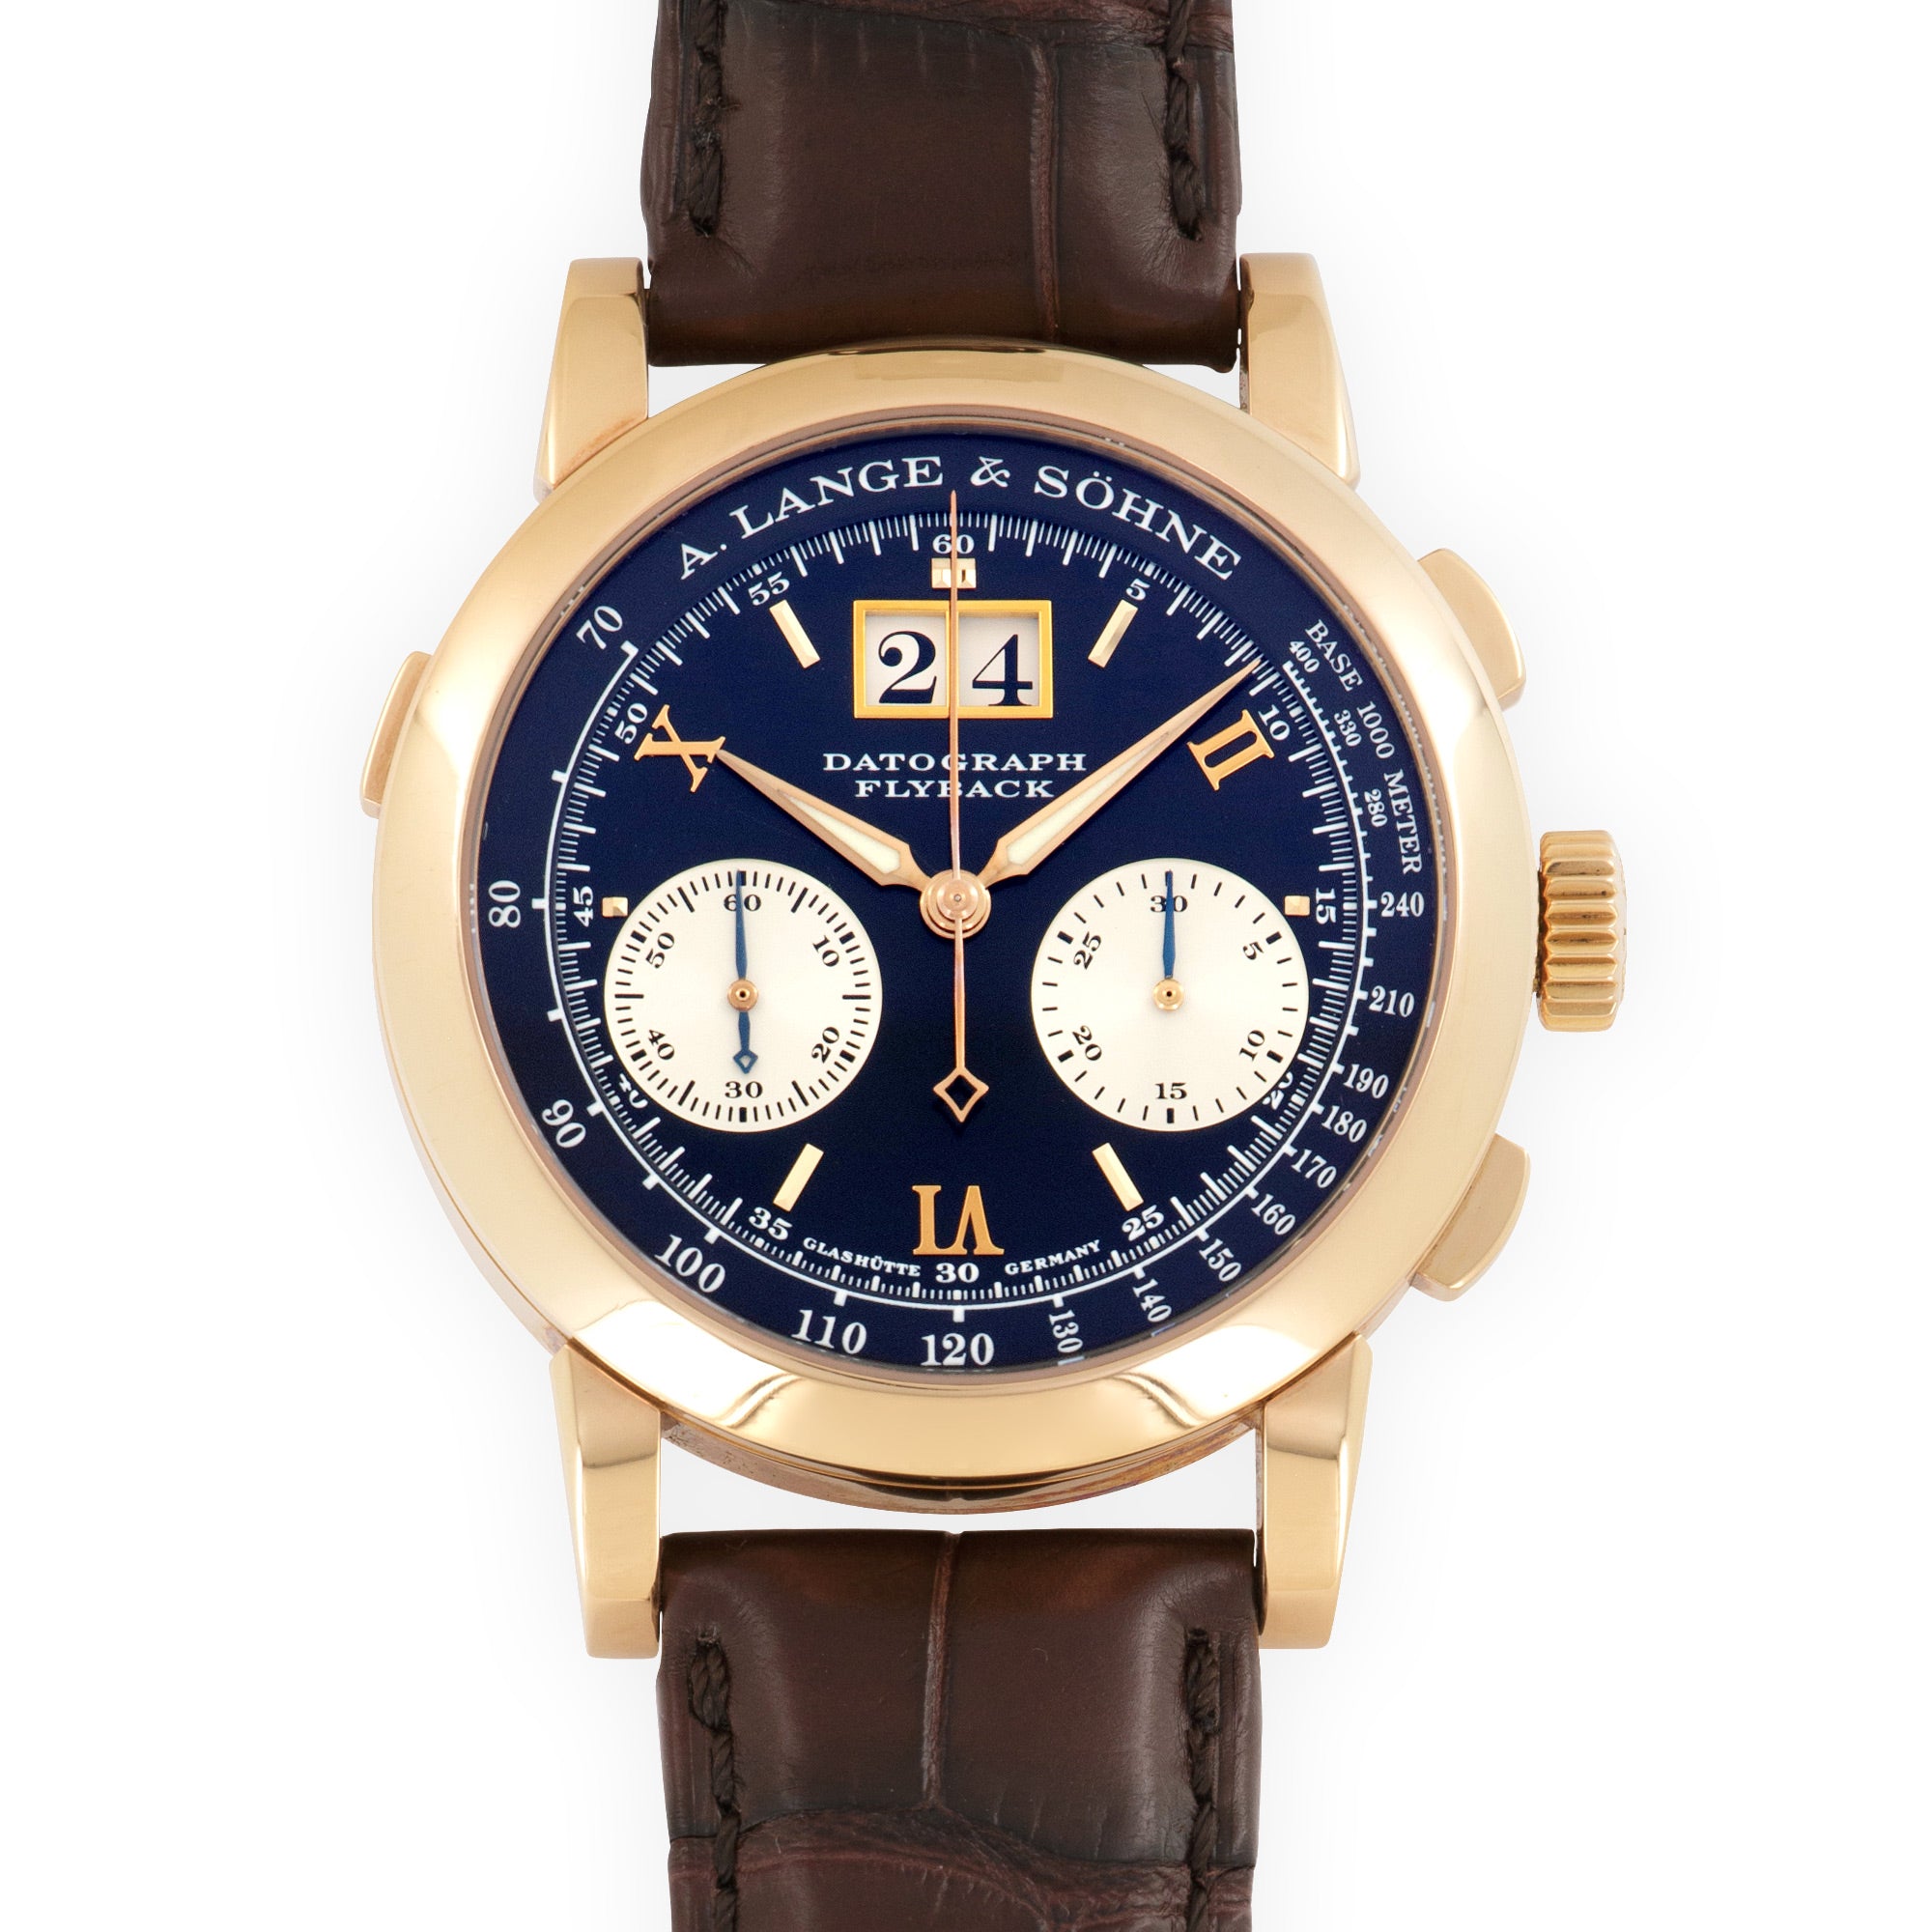 A. Lange & Sohne - A. Lange & Sohne Rose Gold Datograph Dufour Watch Ref. 403.031 - The Keystone Watches